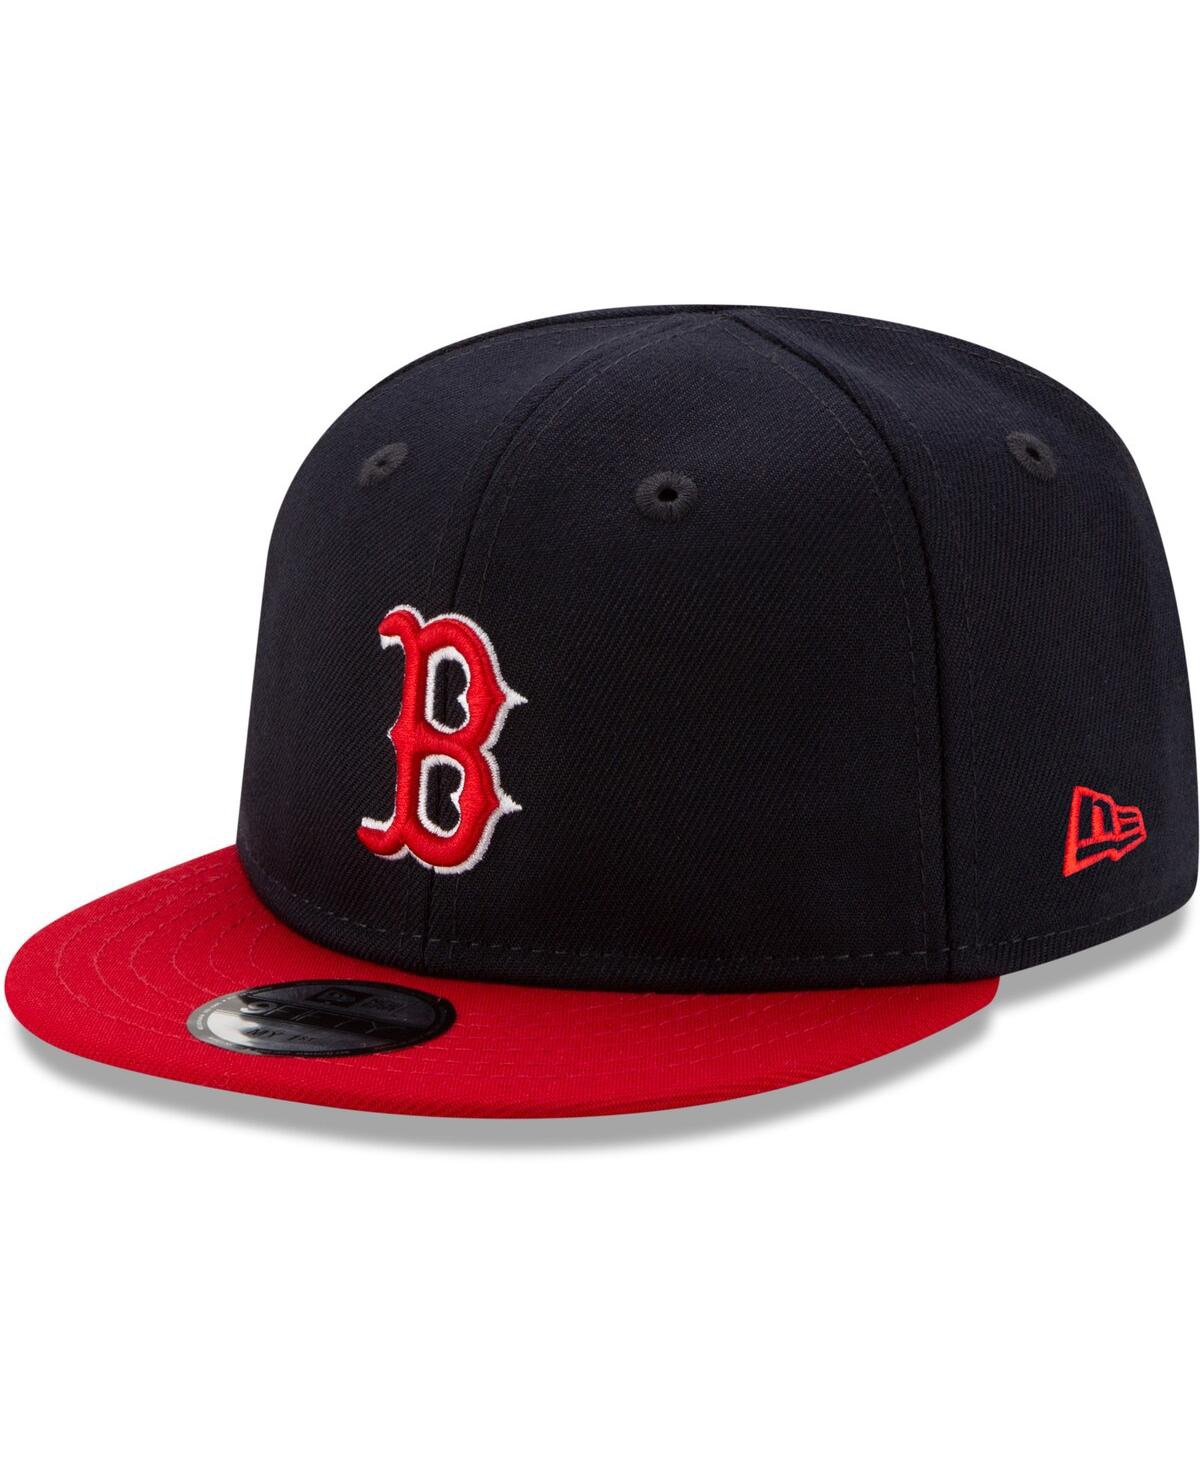 New Era Babies' Infant Unisex  Navy Boston Red Sox My First 9fifty Hat